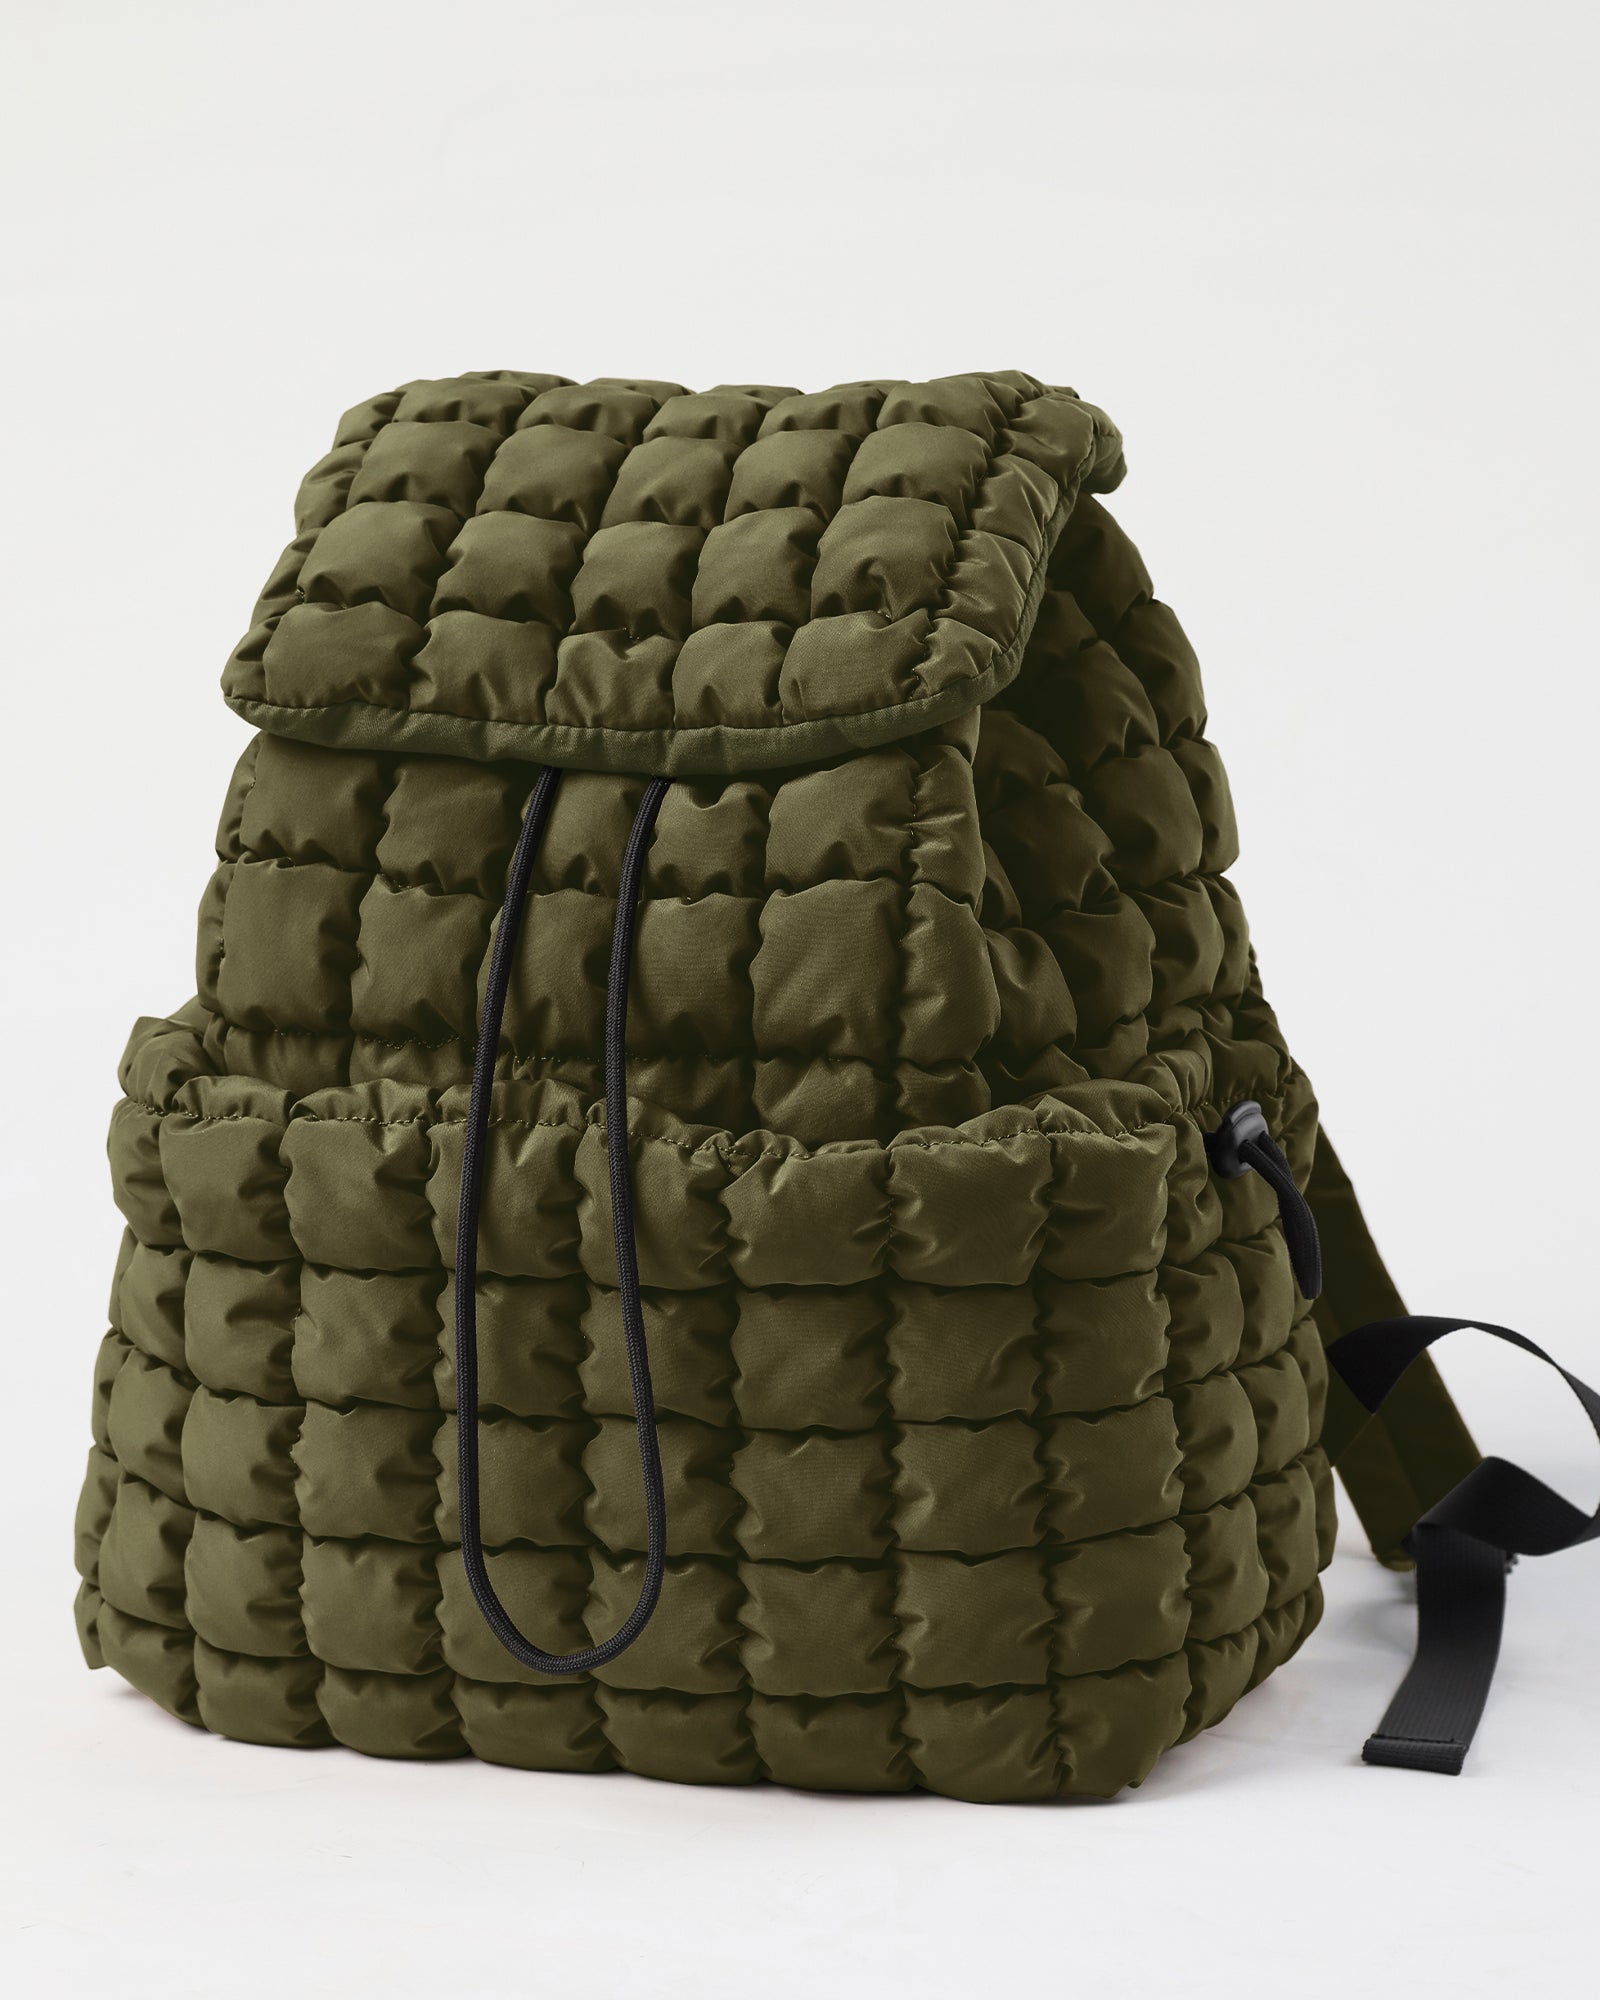 Lightweight Quilted Backpack Avocado 13" x 15" x 6.5" - ododos